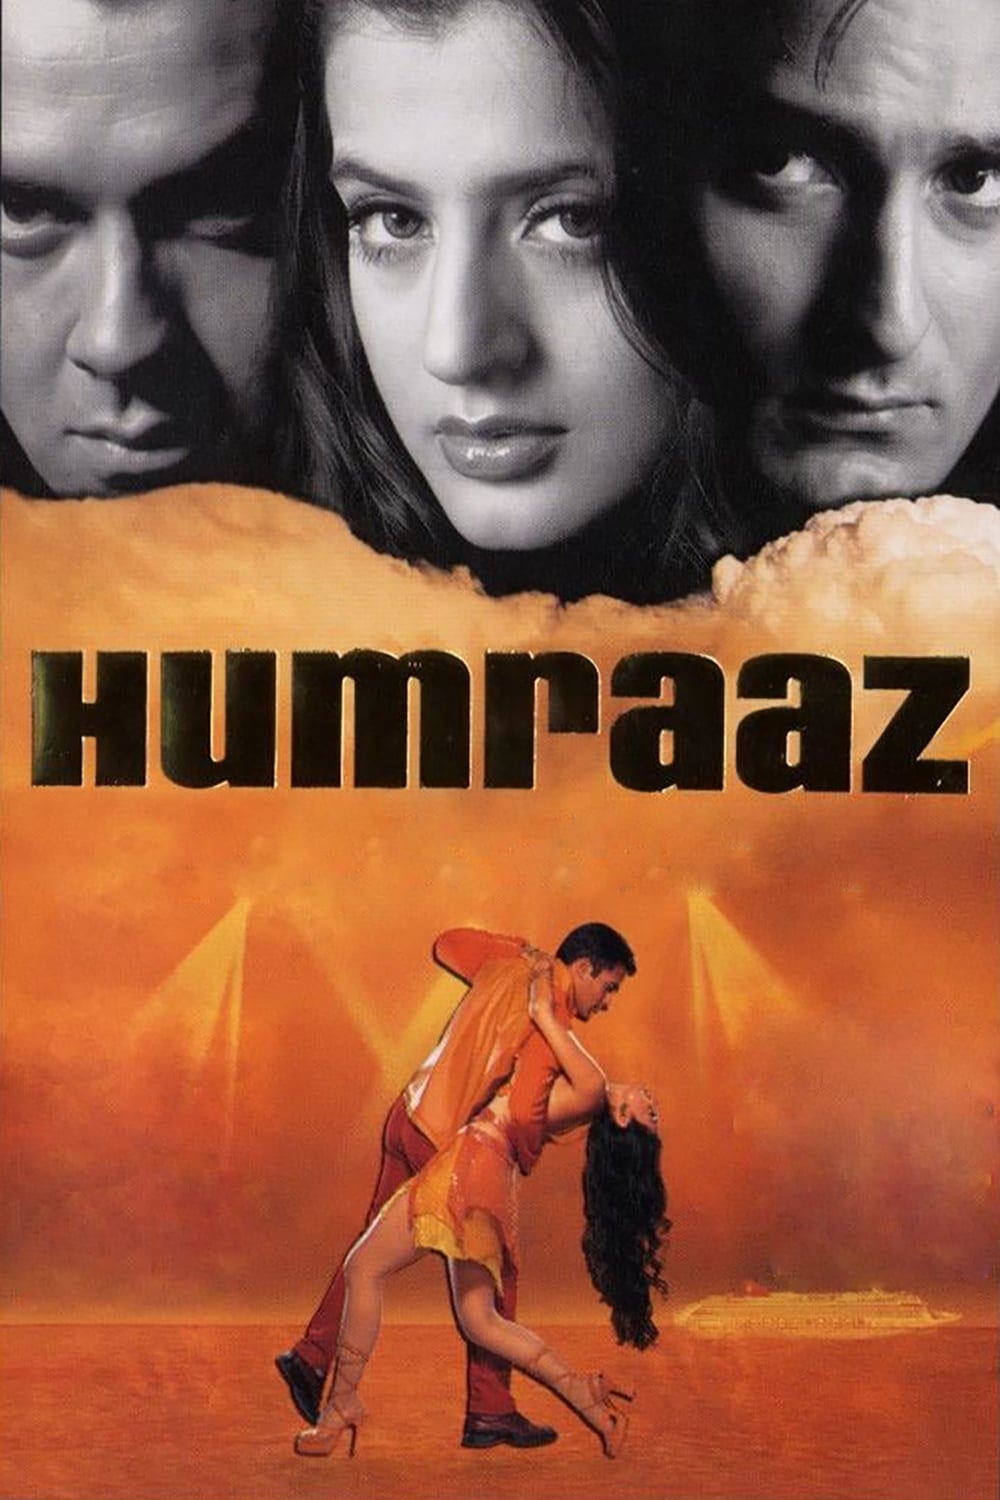 Poster for the movie "Humraaz"